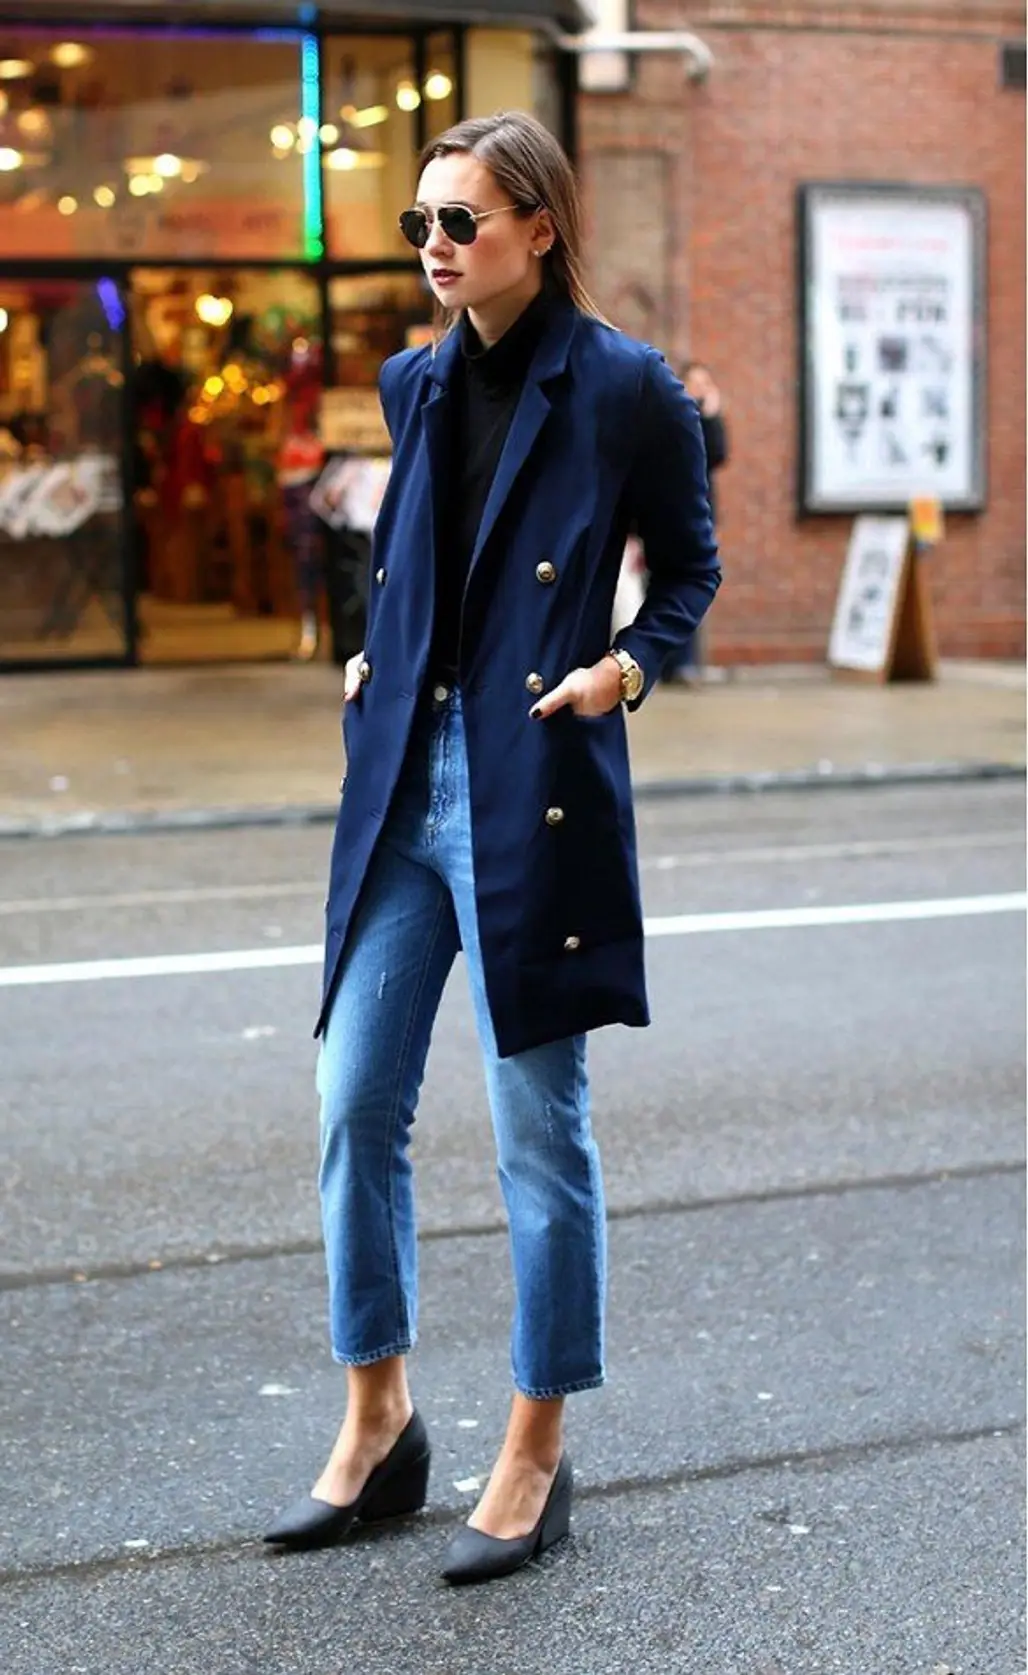 Ankle Length Jeans with a Navy Blue Coat